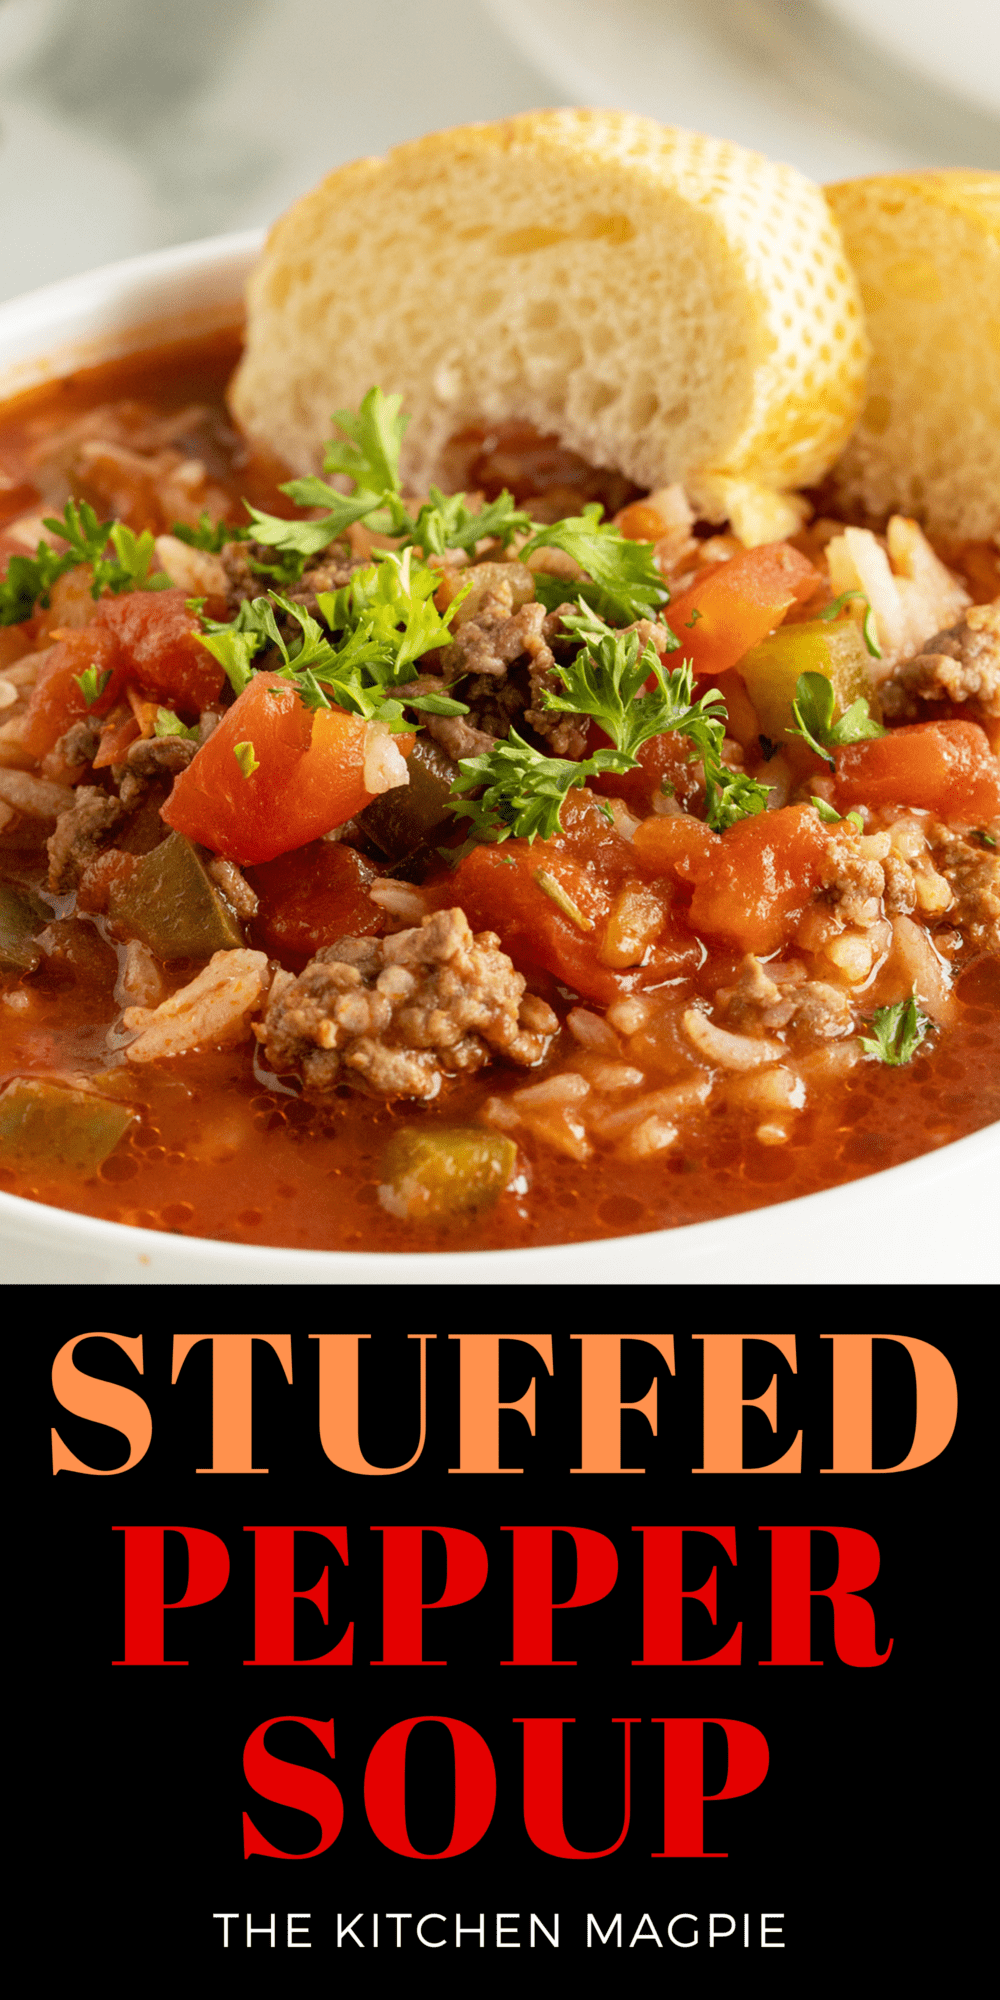 Stuffed pepper soup is packed with vegetables, meat, rice, and sauce, making this a hearty, comforting soup that is perfect for cold weather days.